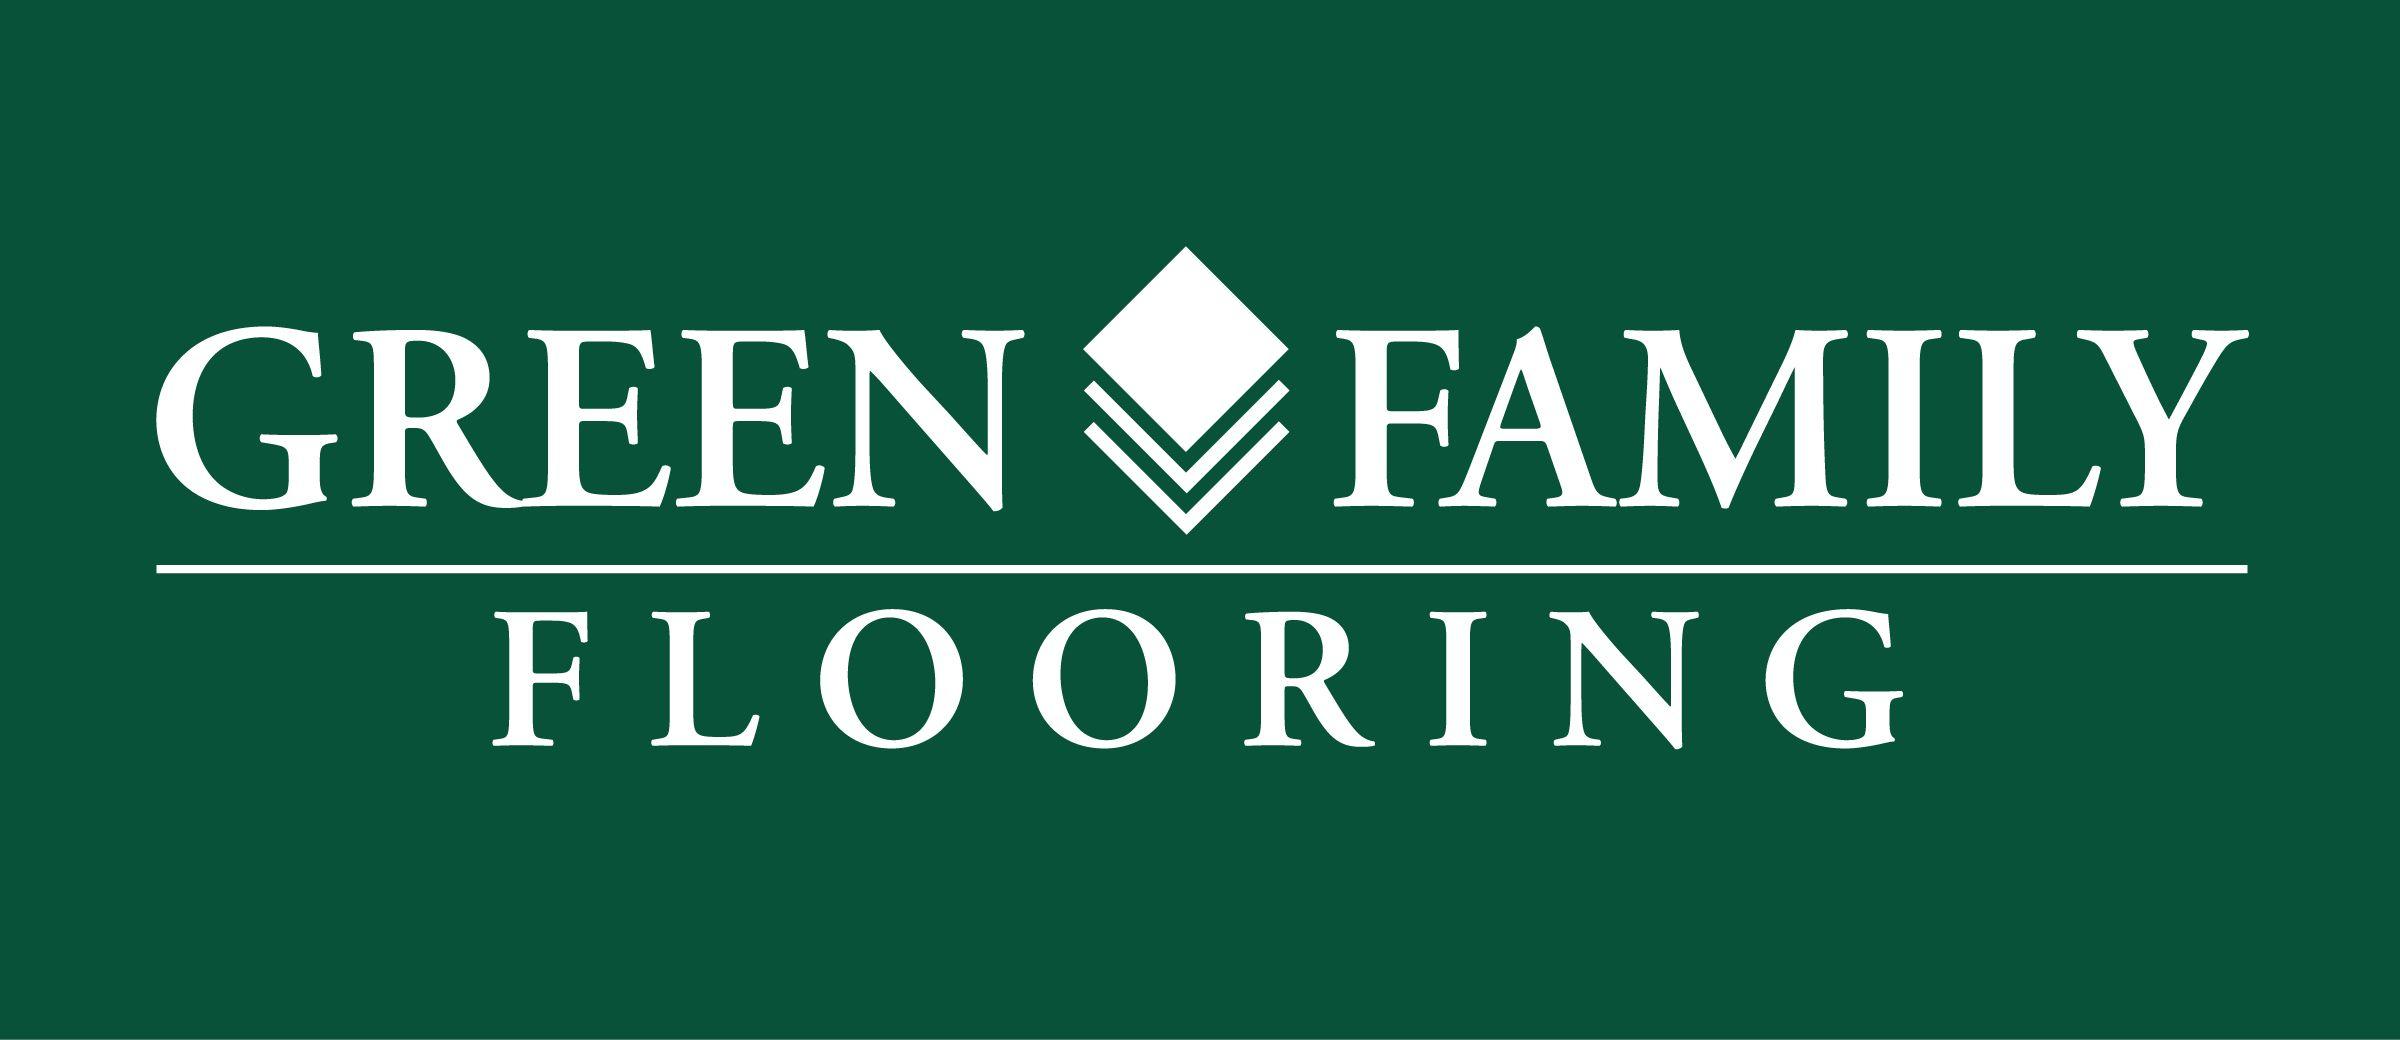 Green Family Logo - Interior Design - About Us